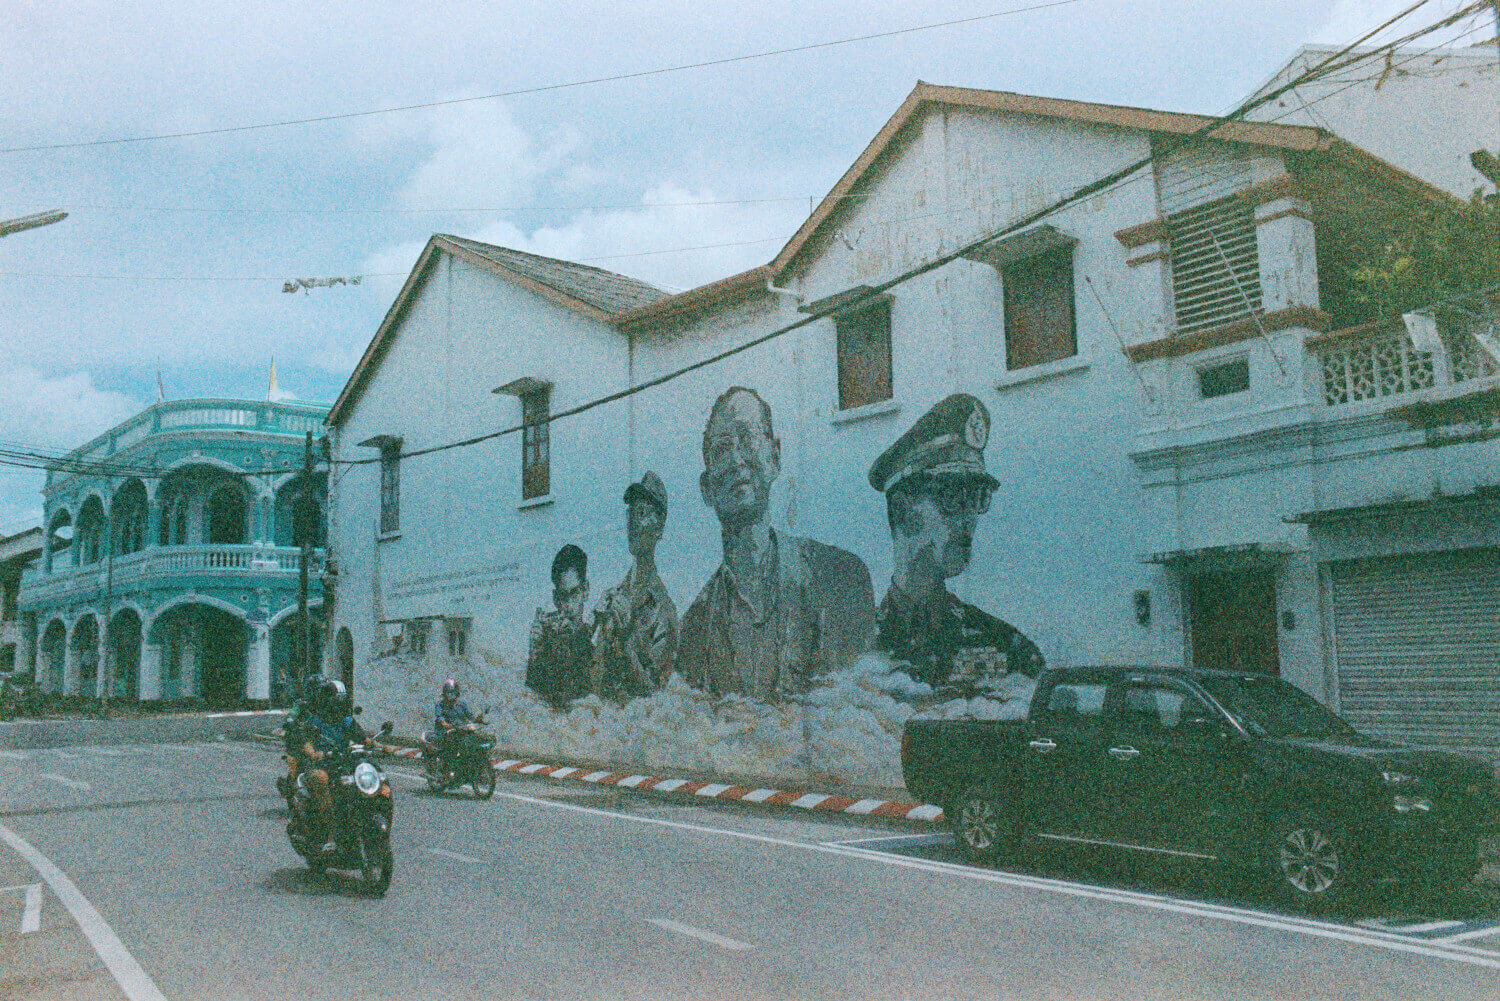 Street scene of the late King Bhumibol depicted in street art, Phuket, Thailand: 5 Frames... With a Canon A-1 and a roll of 1987 Sainsbury's Colour Print Film (CPF) and a Canon A1 - by James Patrick